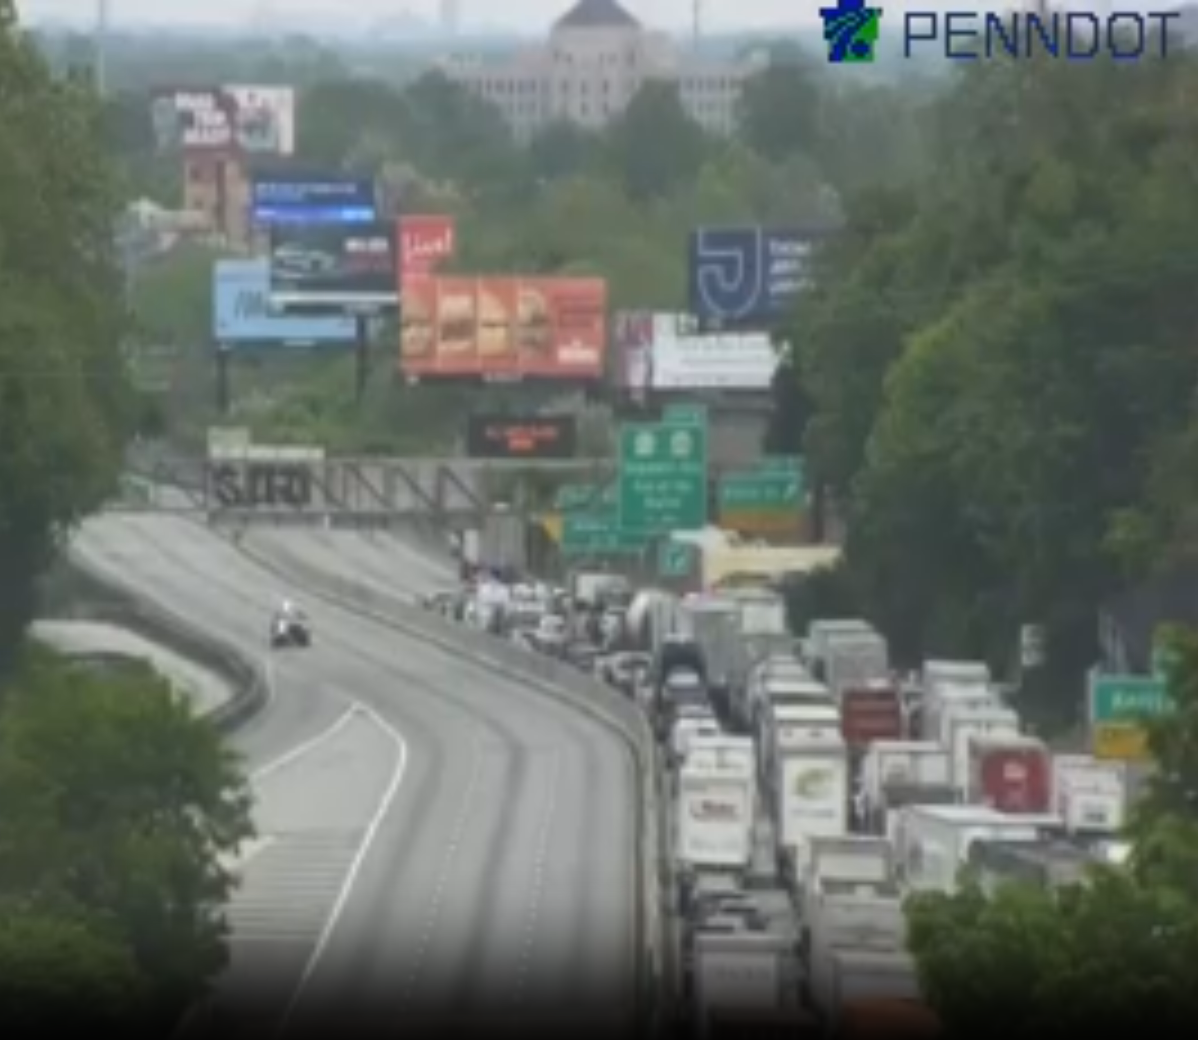 Delaware police at standoff occuring in Chester, Pennsylvania; part of I-95 NB closed